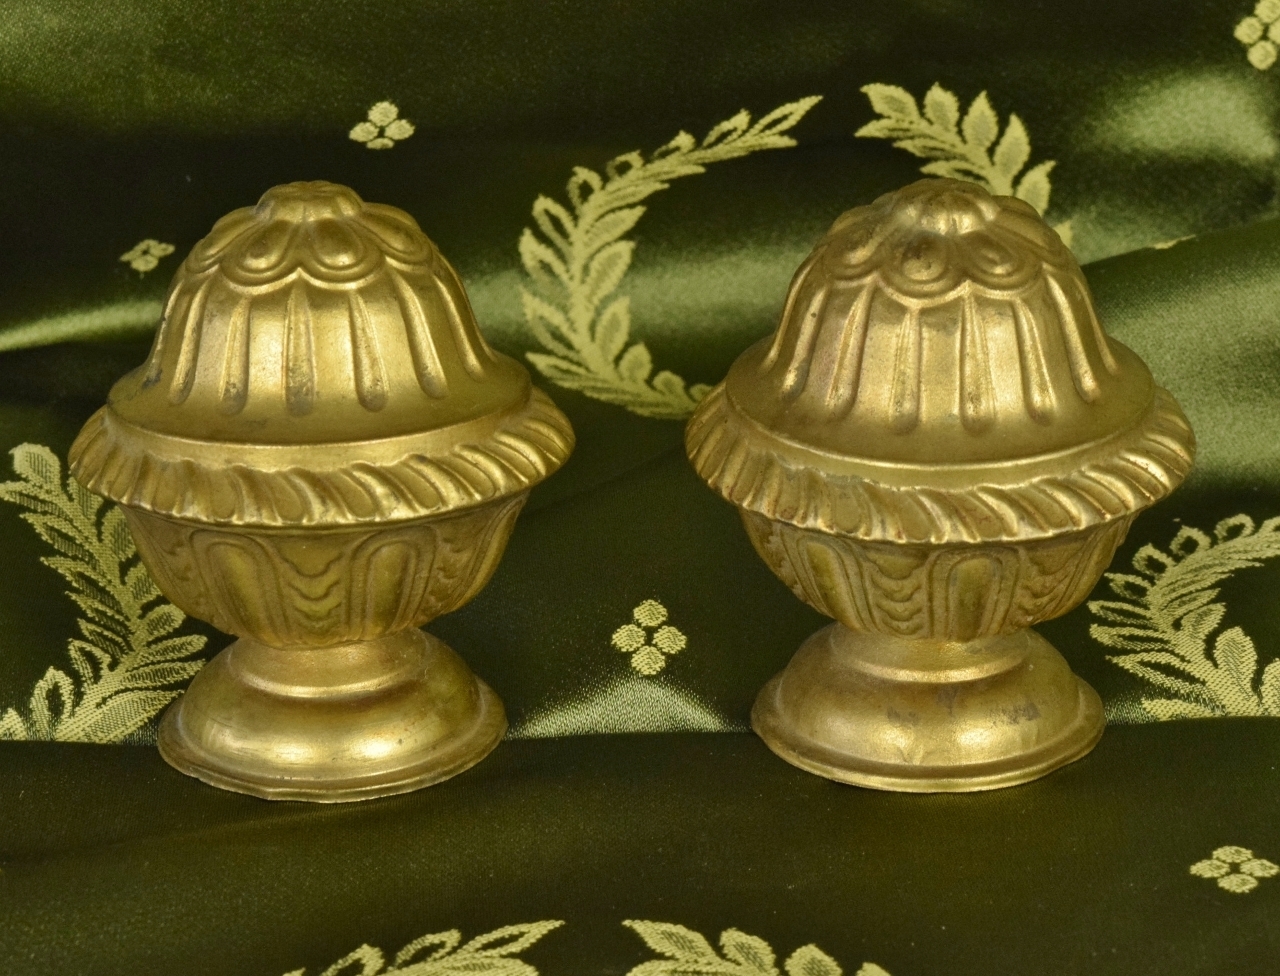 B984 - Pair Lovely Antique French Toleware Chateau Curtain Pole Finials,19th C